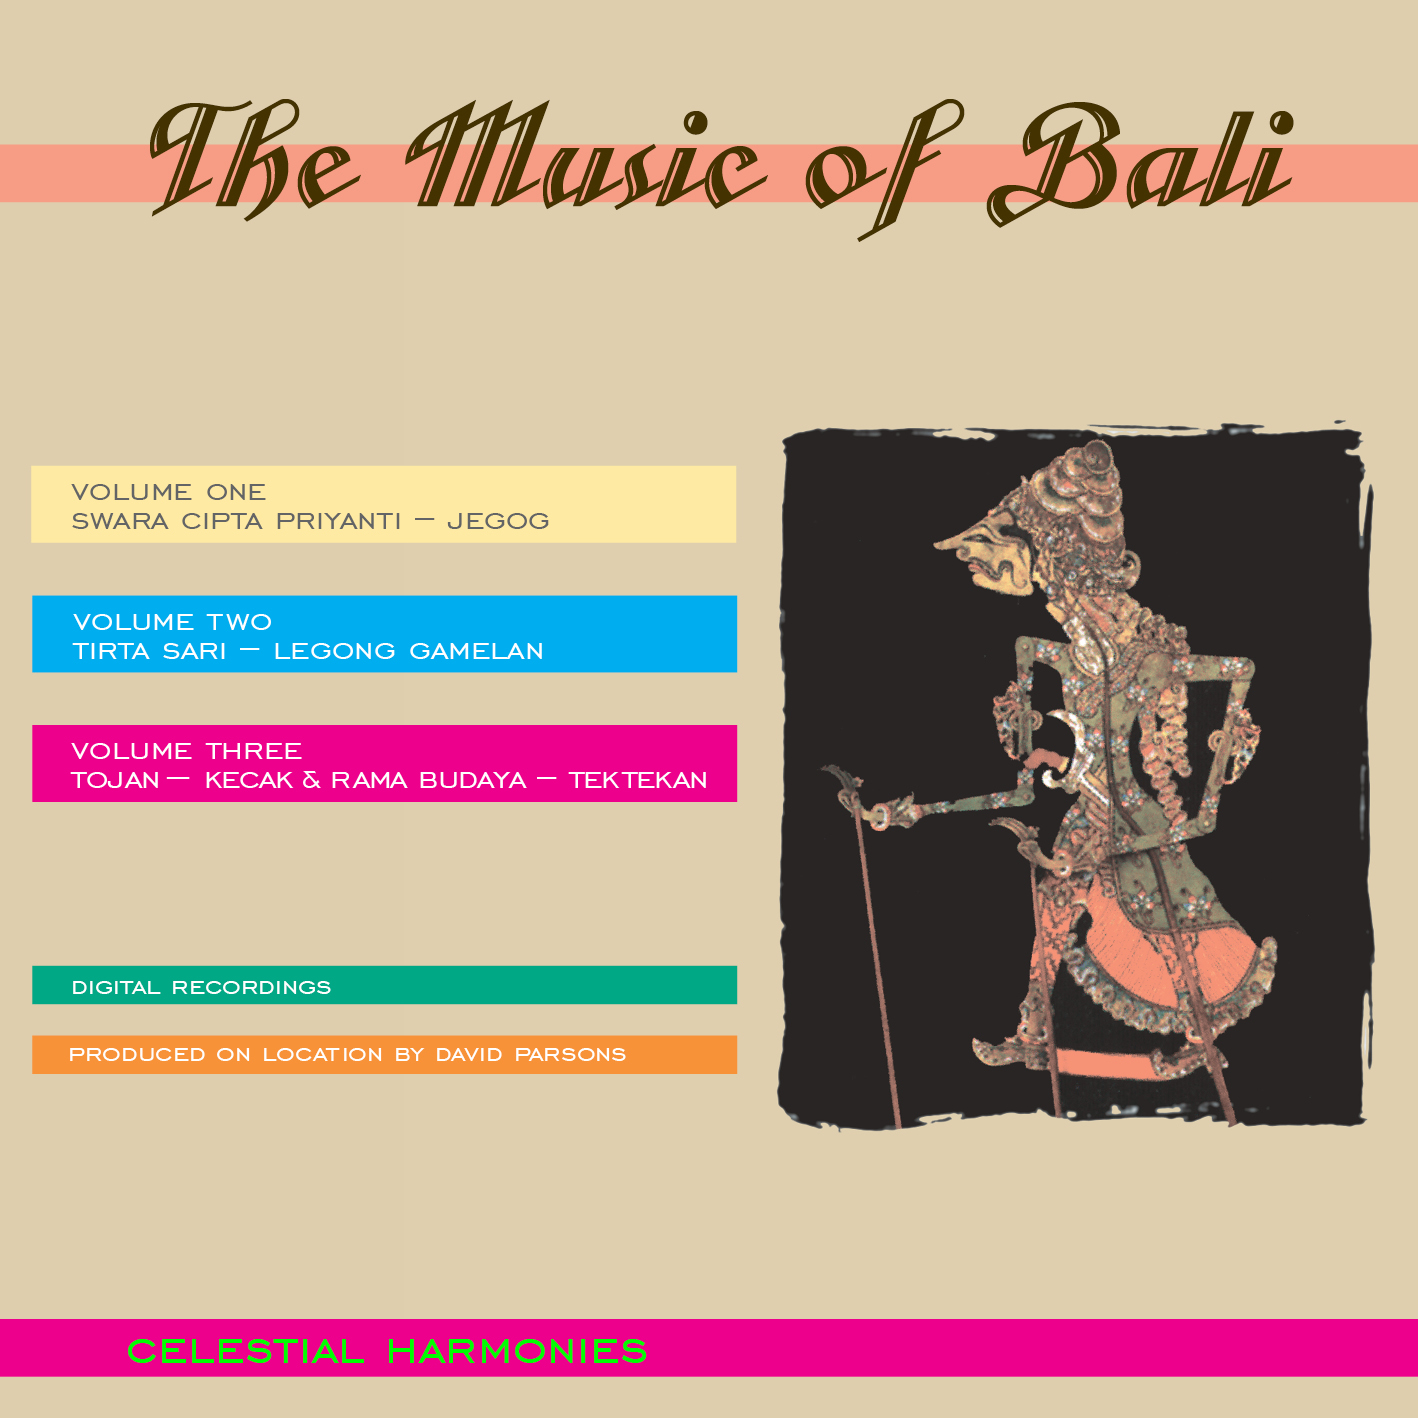 The Music of Bali 3 CD Boxed Set